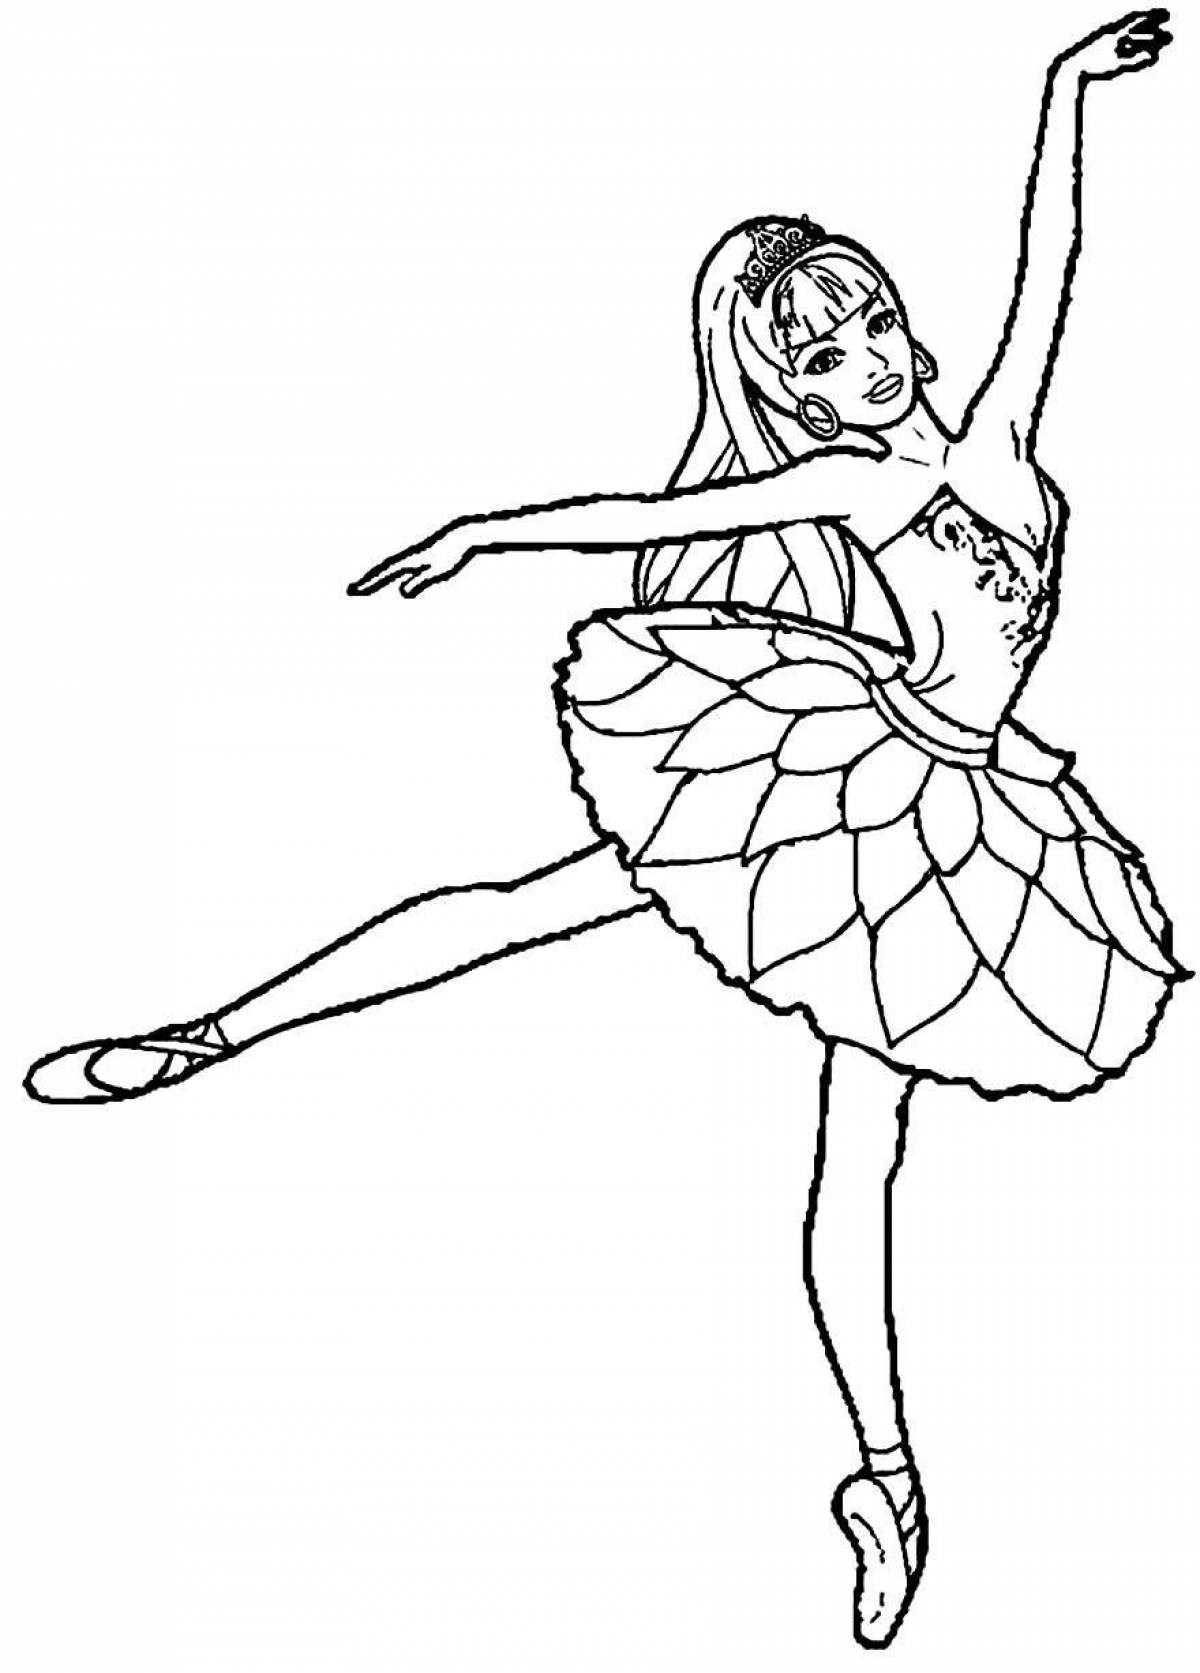 Adorable ballerina coloring pages for kids